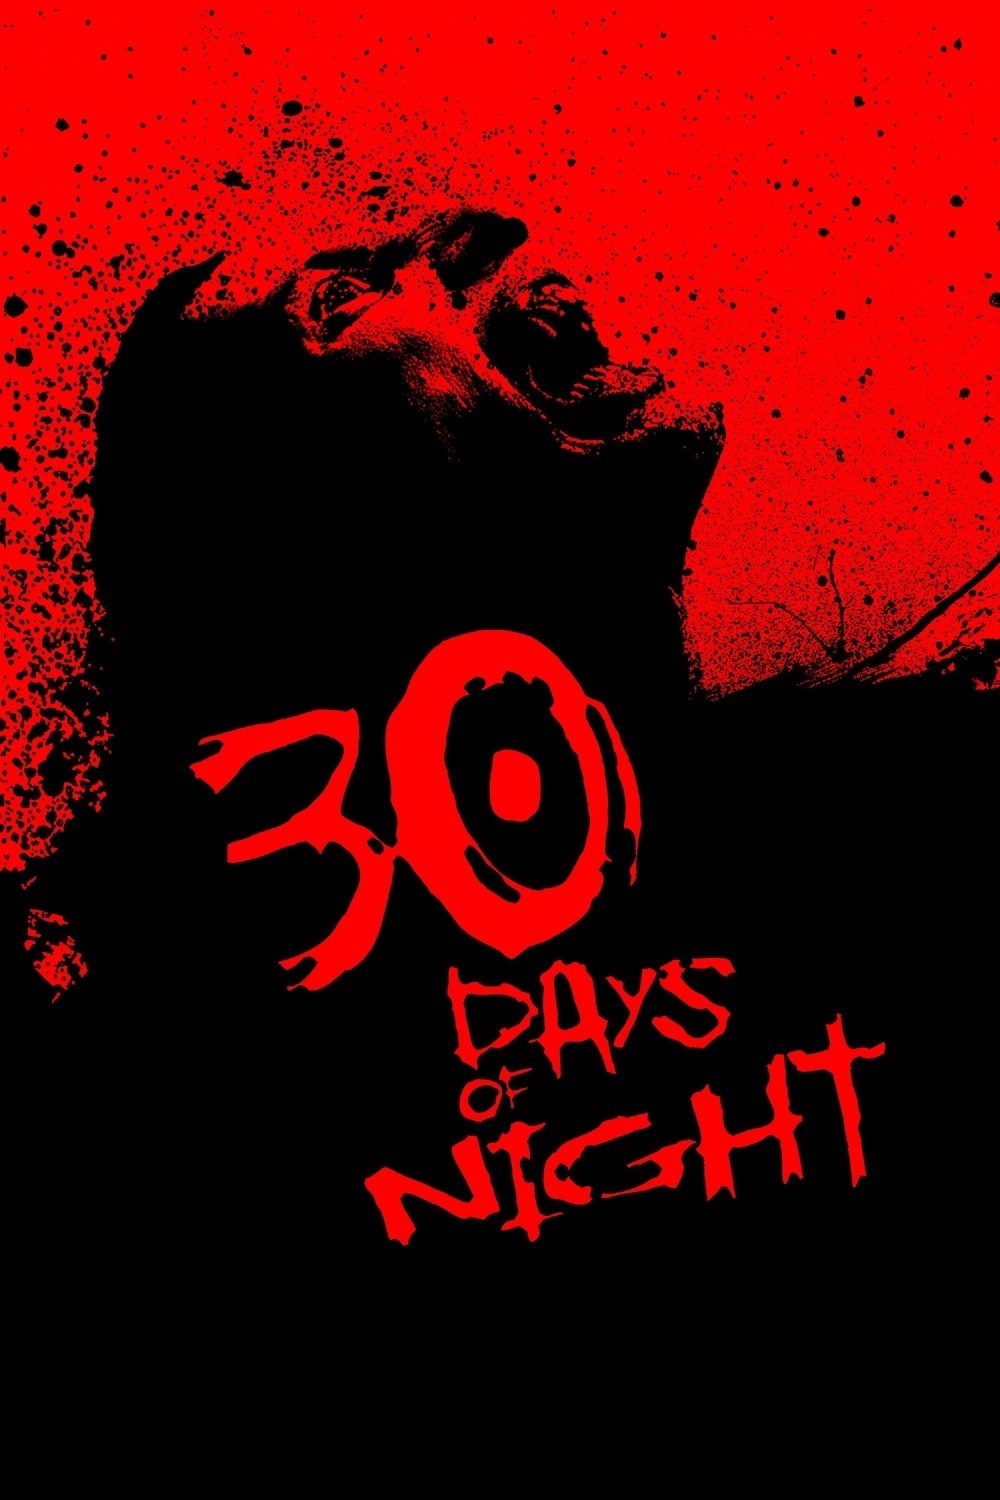 This is a poster for the film 30 Days of Night.